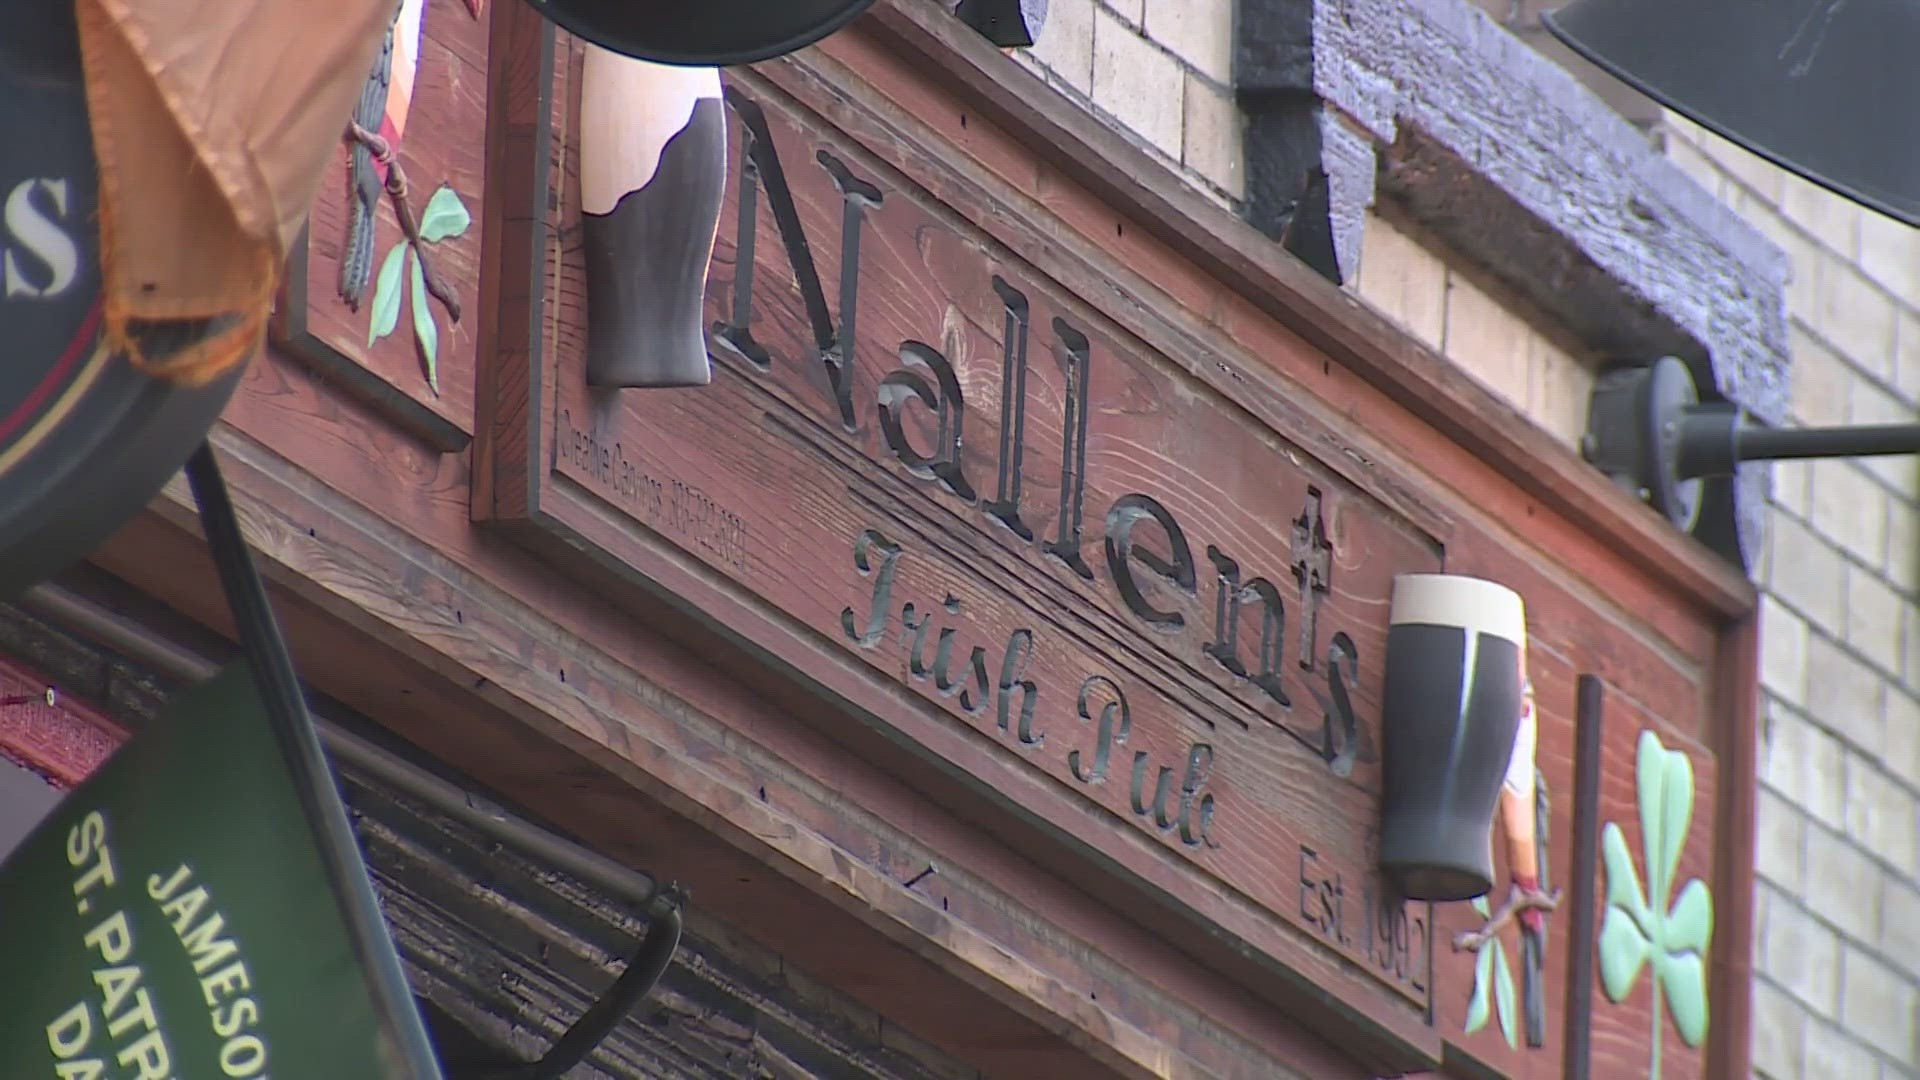 John Nallen, the owner of Nallen's Irish Pub, said he's seen the holiday go from a primarily religious one to something else entirely.